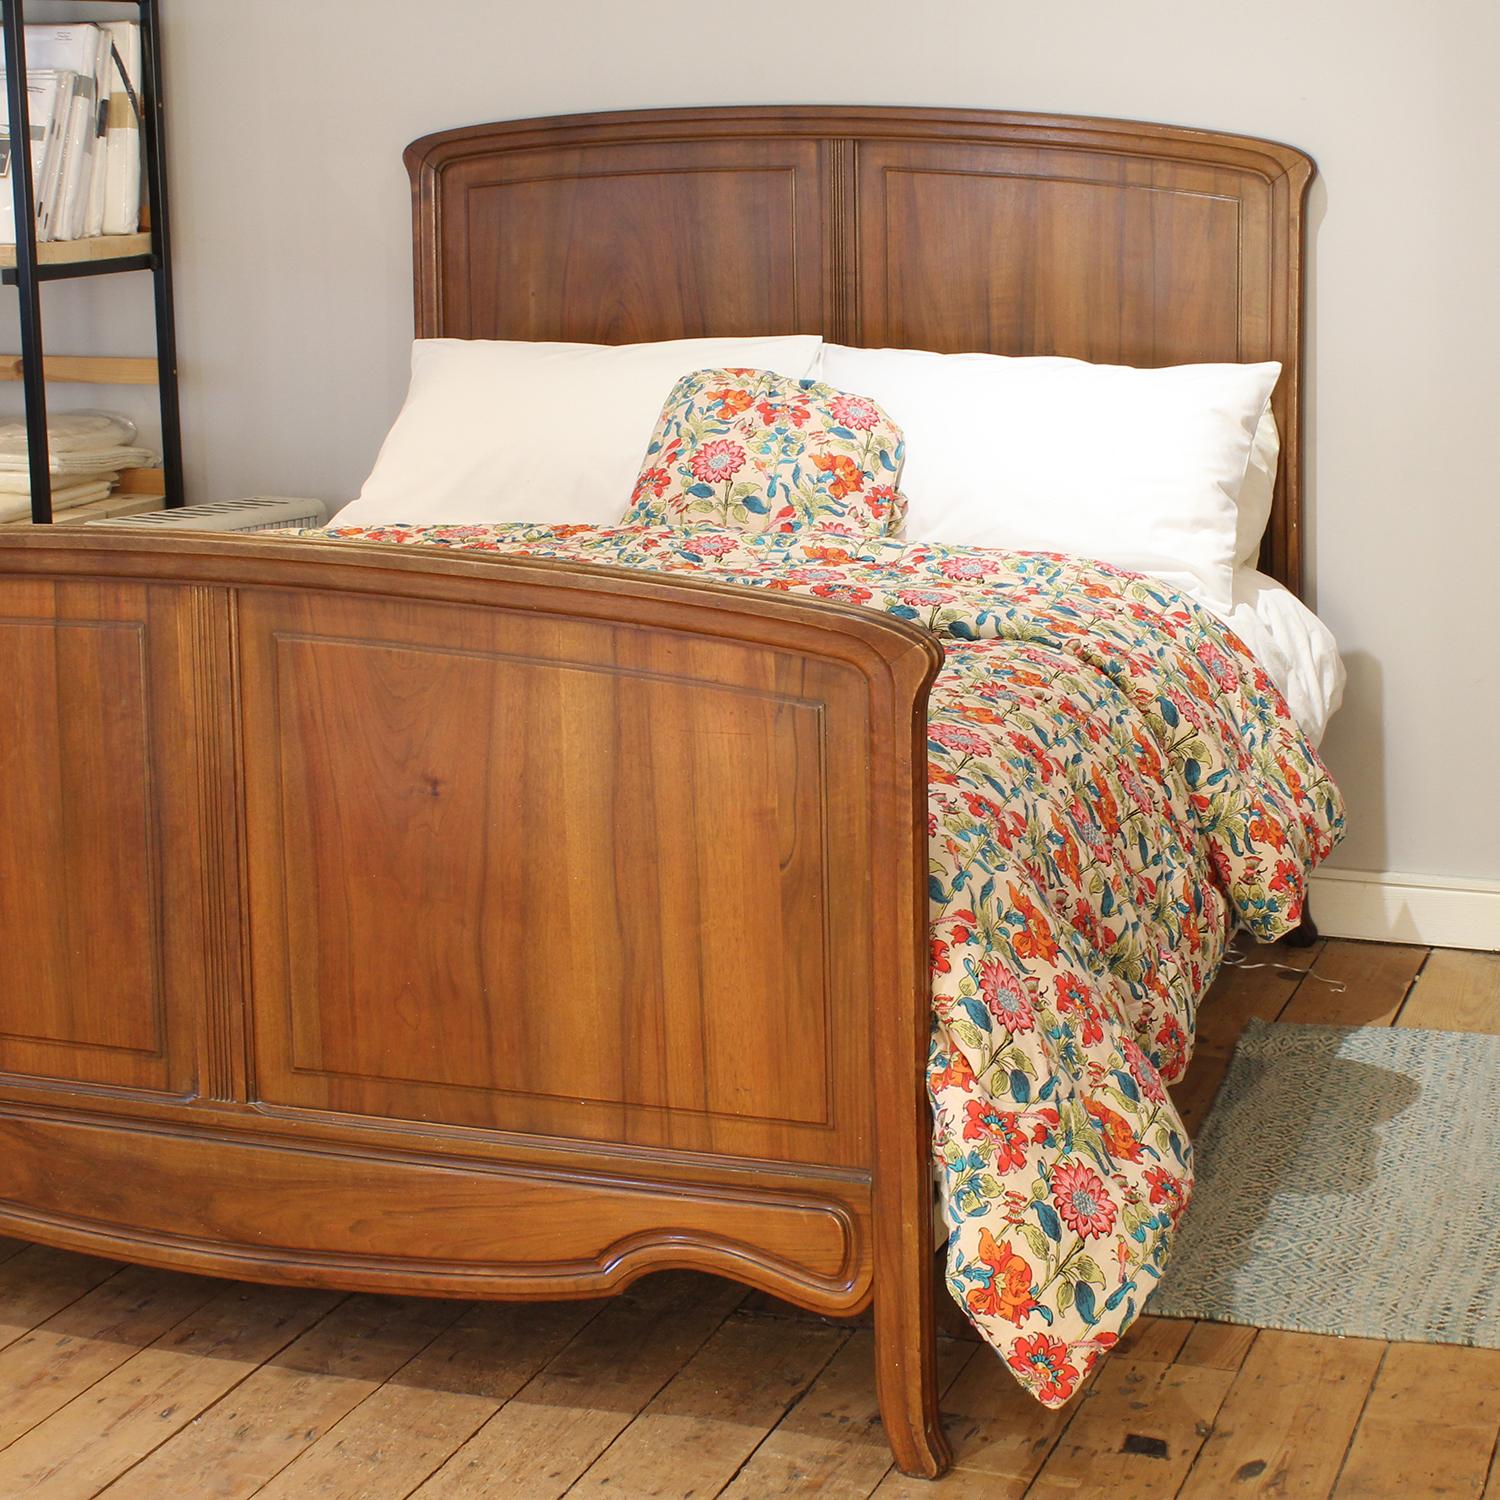 An attractive walnut bedstead in the Art Nouveau style with simple curved top panels.

This bed accepts a kingsize, 5ft (60 in), base and mattress set.

The price is for the bed frame and a firm bed base. 

The mattress, sprung bed base,